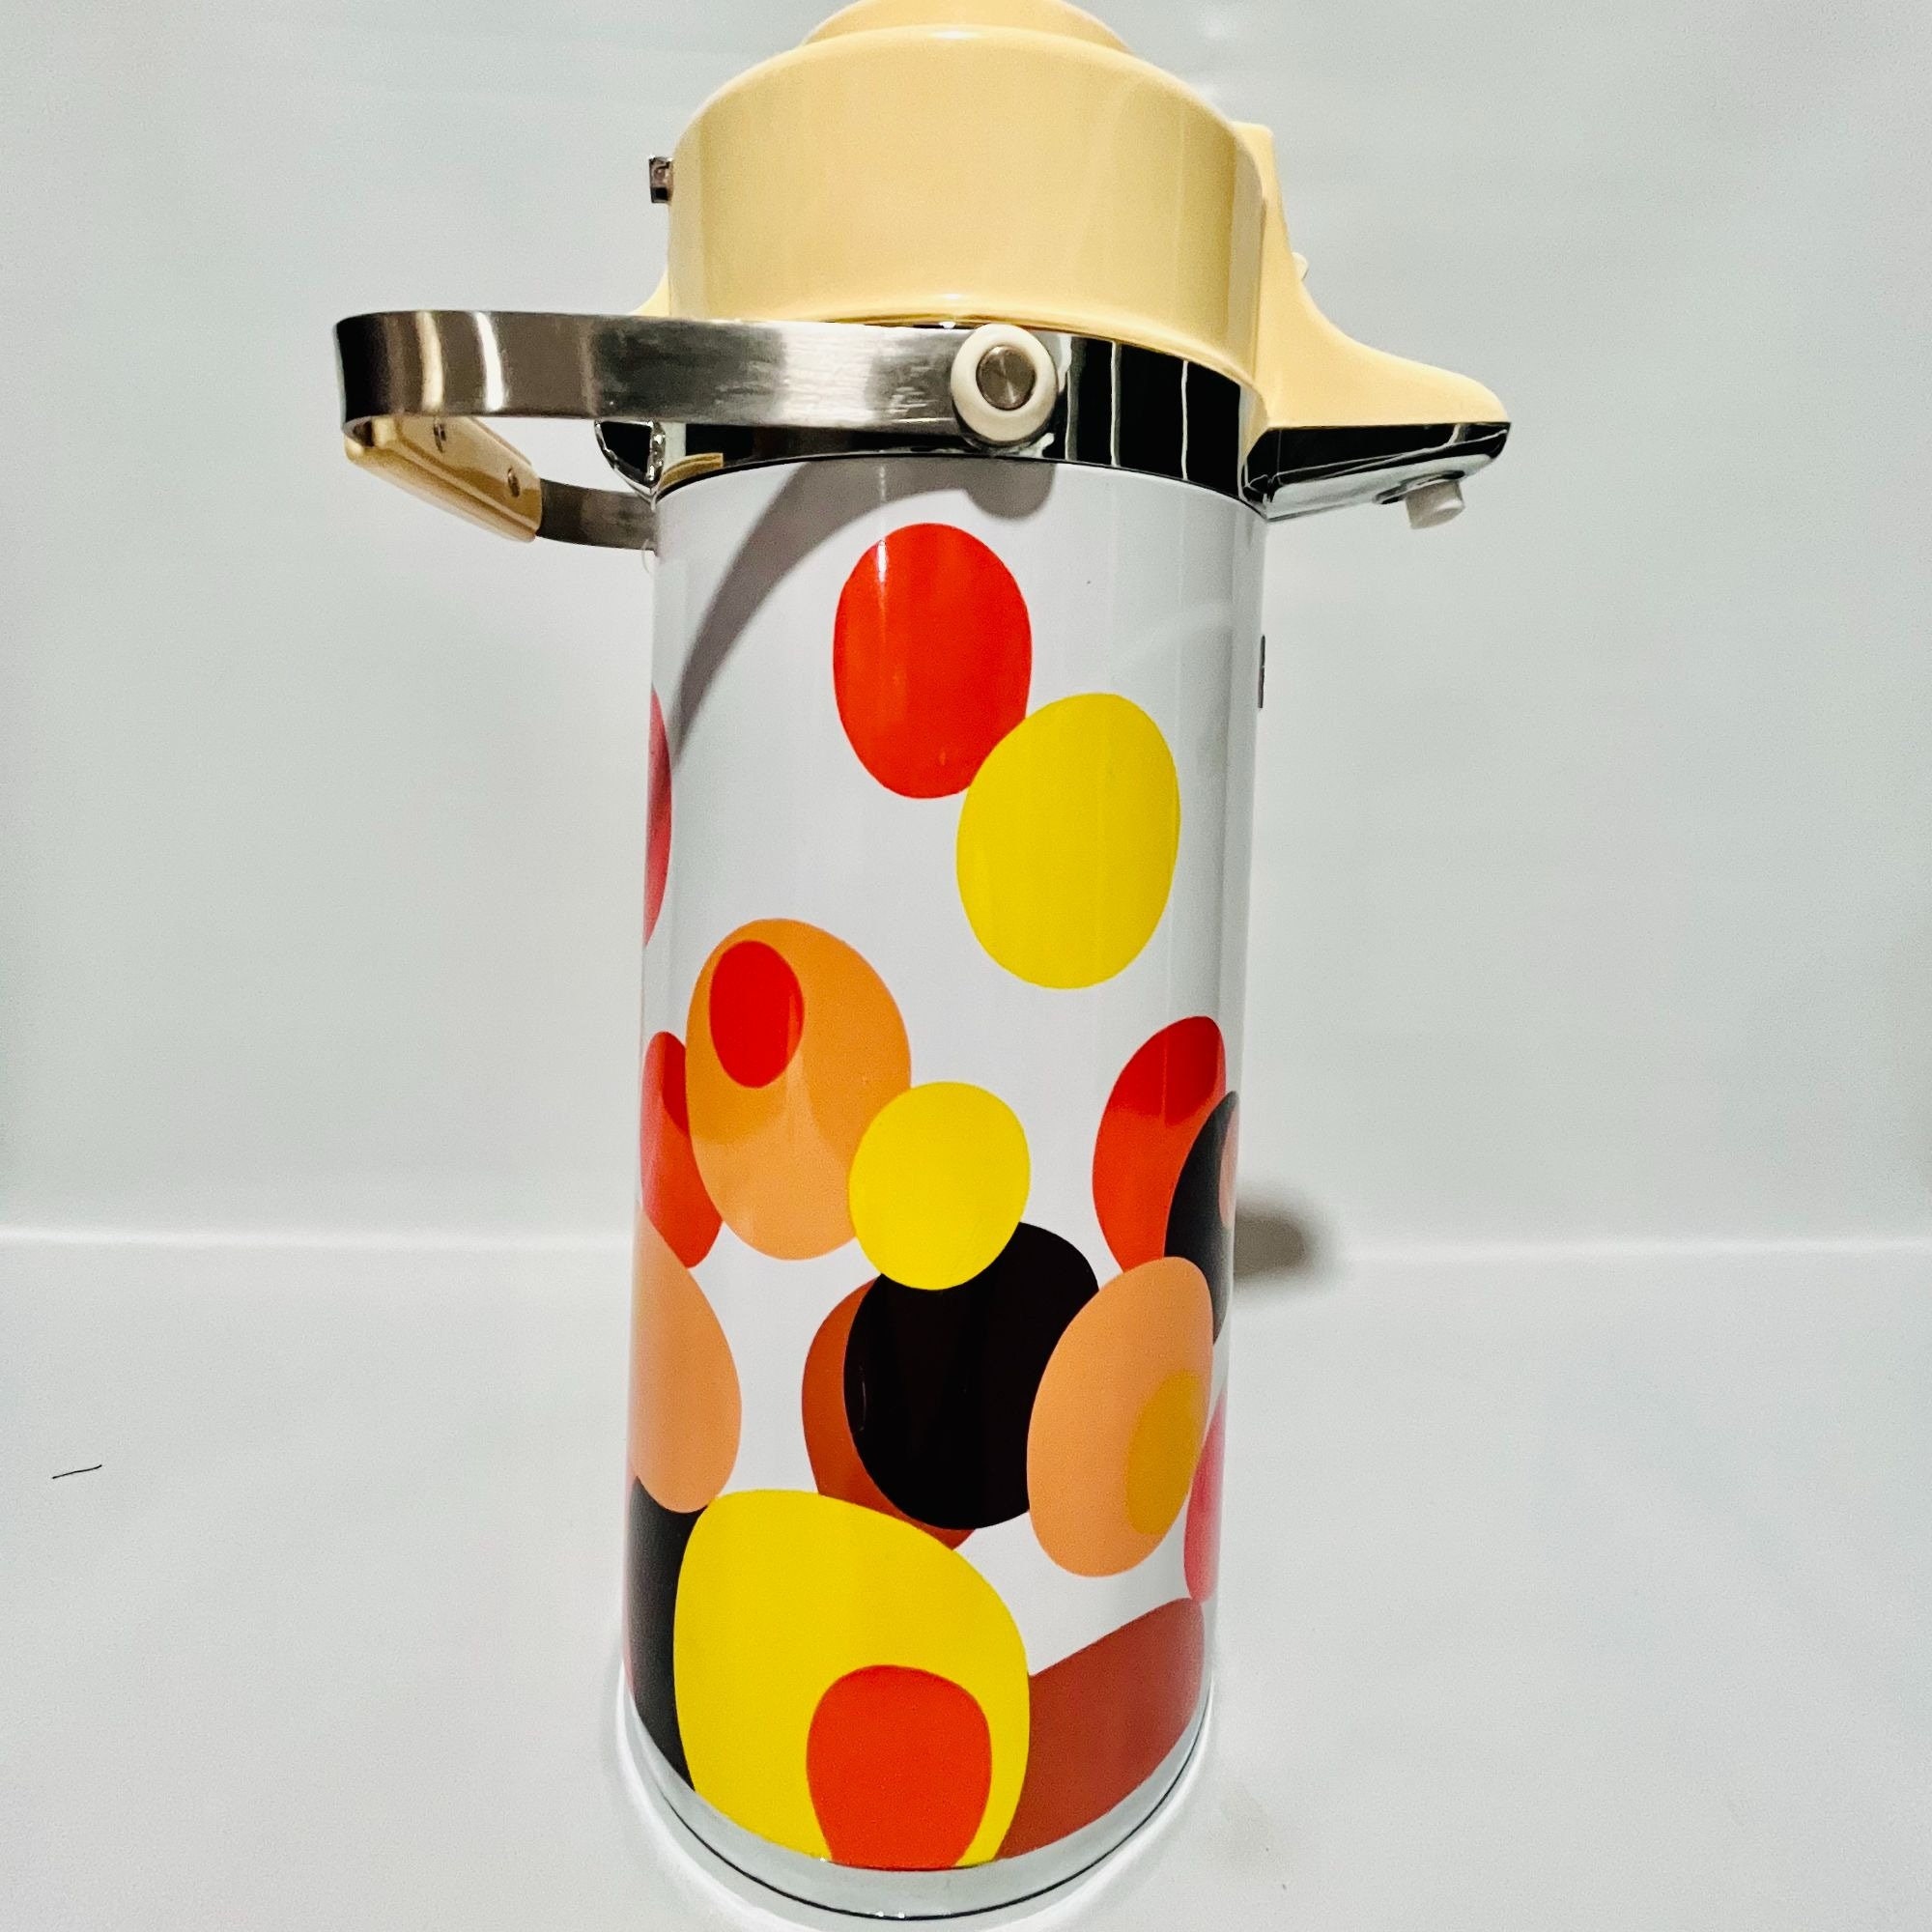 Vintage 1970s Retro Floral Patterned Pump Thermos by Everest Airpot 